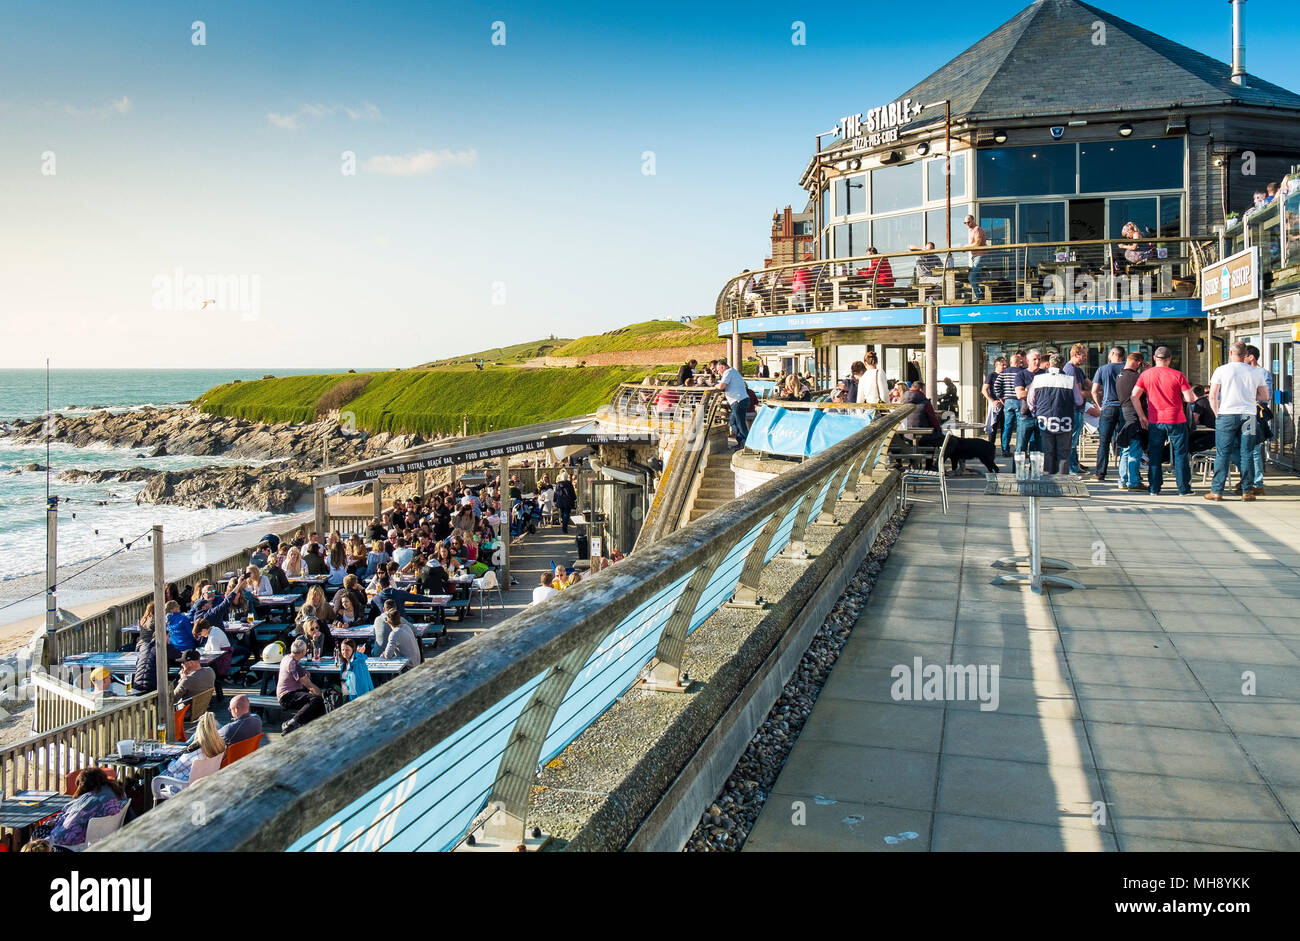 Holidaymakers on a staycation holiday at the Fistral Beach Bar enjoying the evening sunshine in Newquay Cornwall. Stock Photo